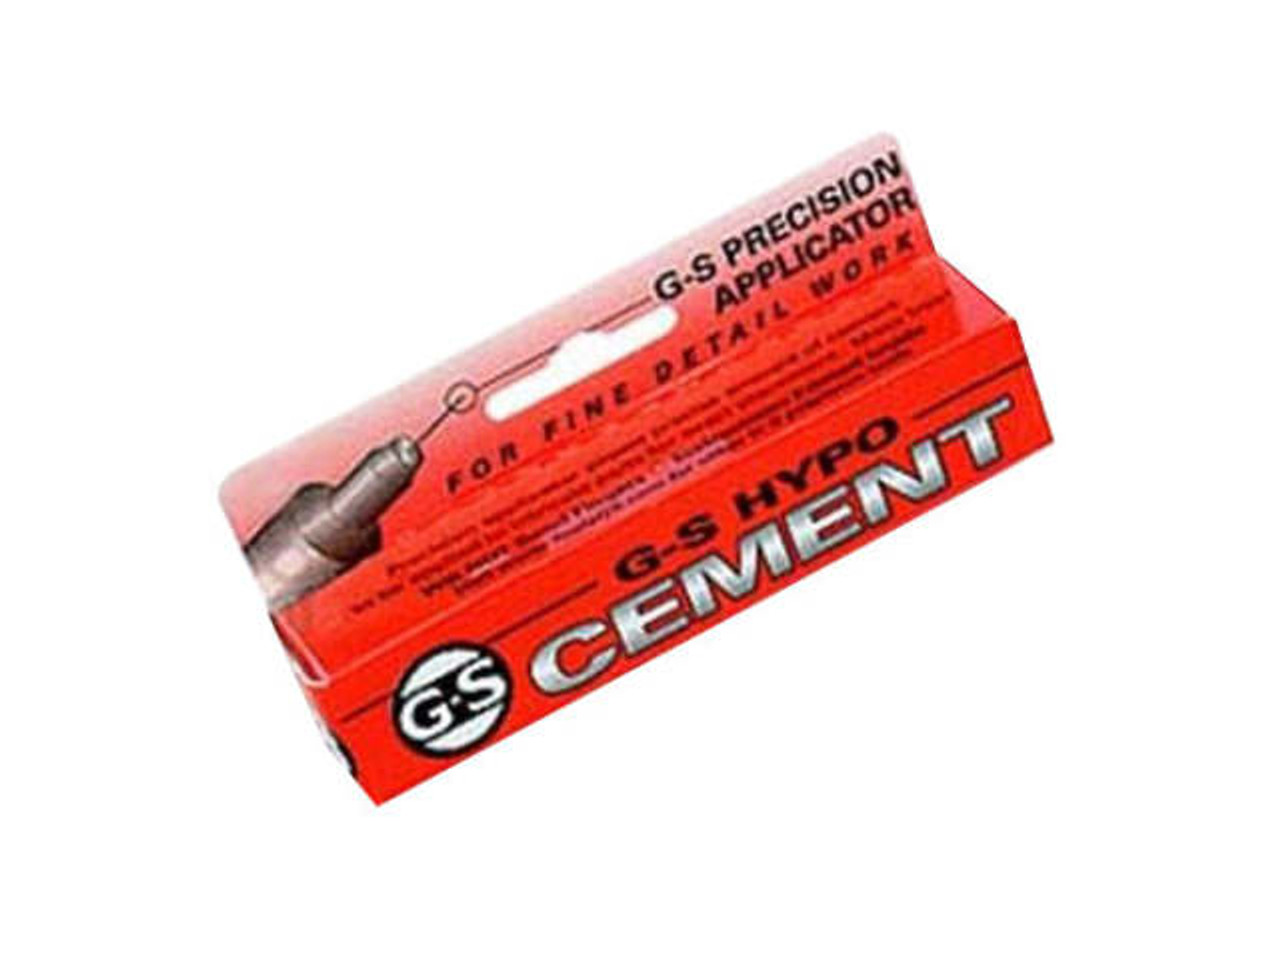 G-S Hypo Cement Craft Glue Watch Crystal Jewelry Adhesive 1/3 oz GS